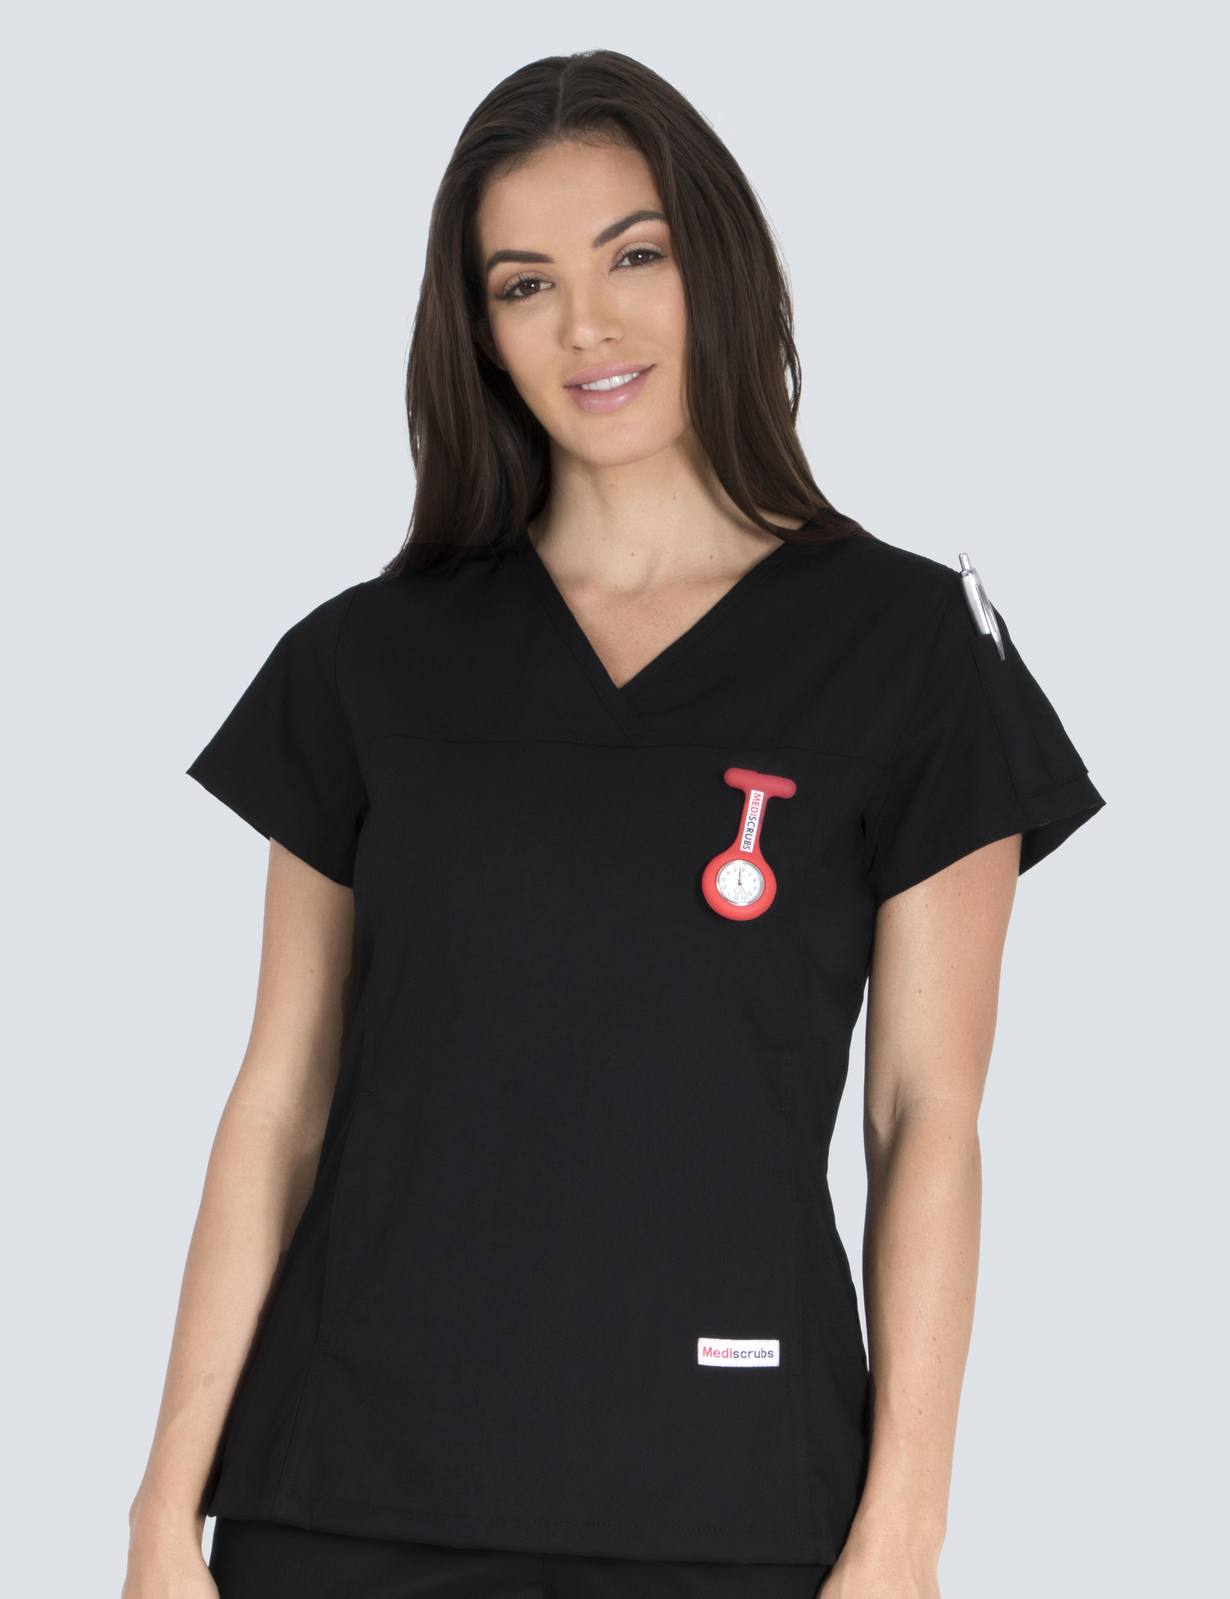 RBWH - Nuclear Medicine Department (Women's Fit Solid Top in Black incl Logos)